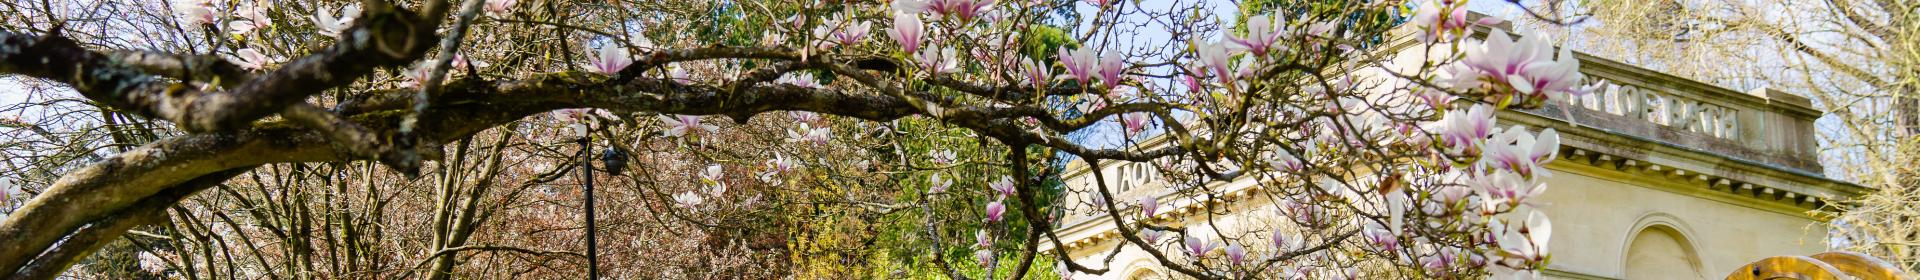 Magnolia in Spring at the Botanical Gardens